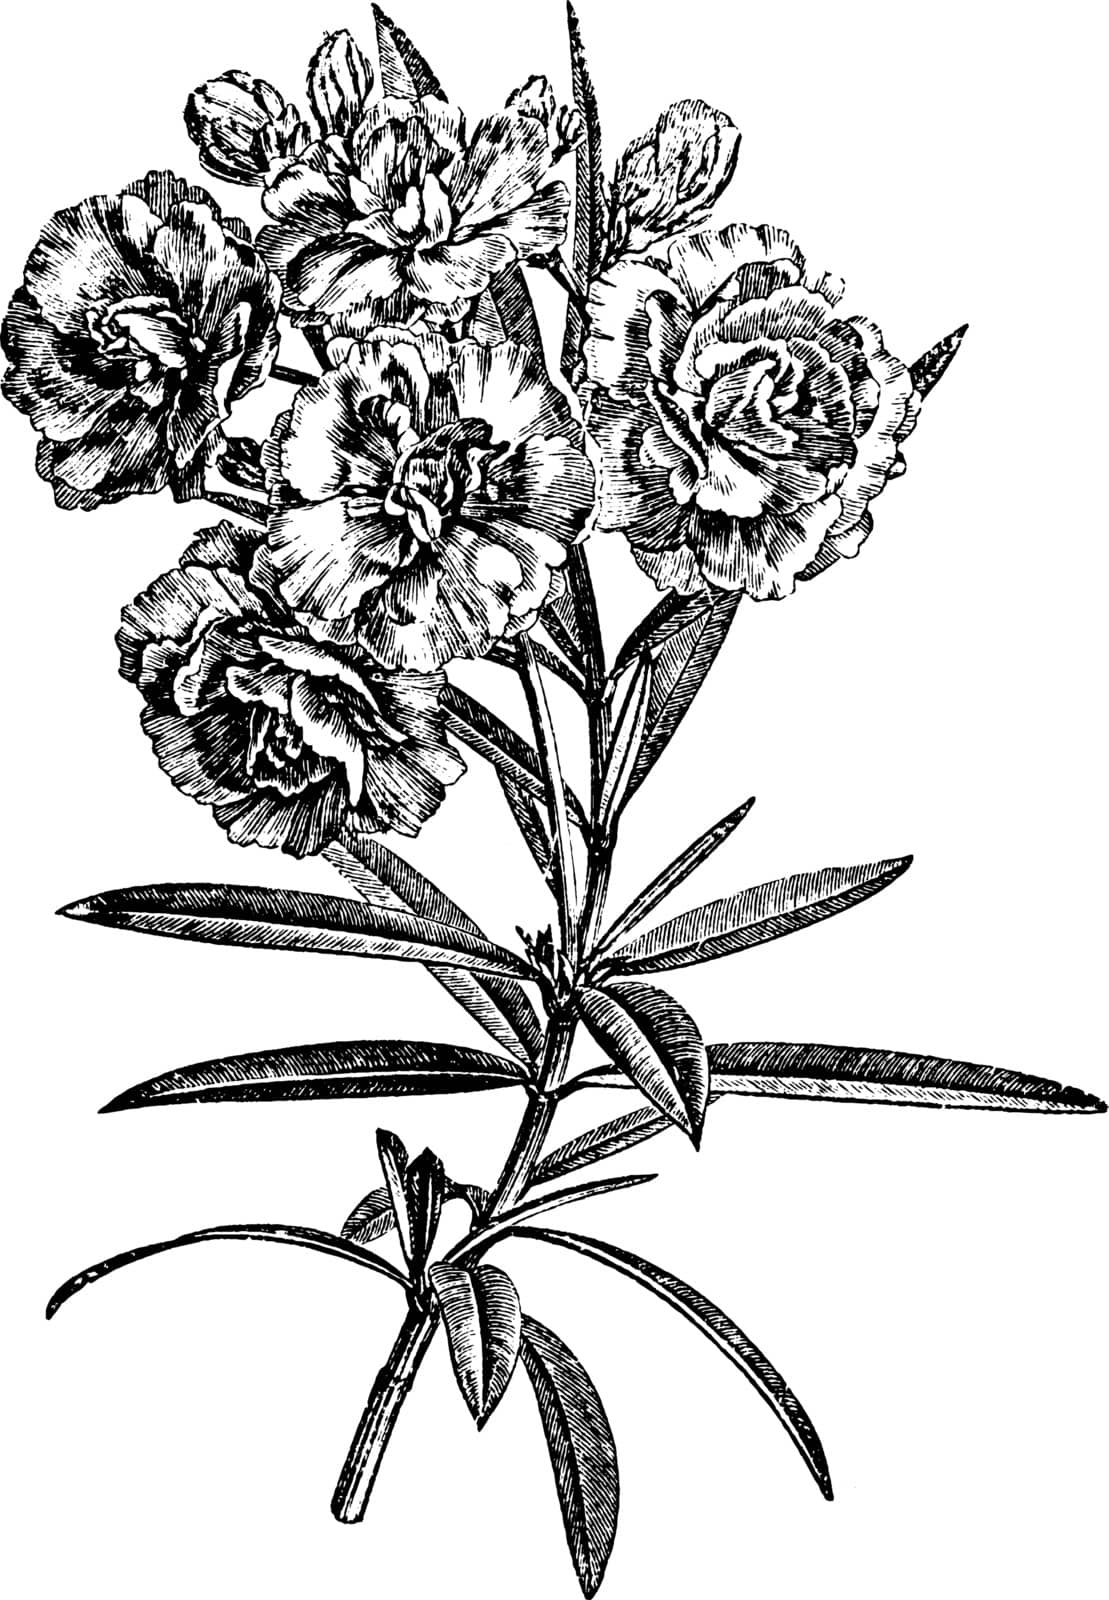 This is a highly toxic plant which is cultivated in the Mediterranean and has been cultivated from ancient times, vintage line drawing or engraving illustration.